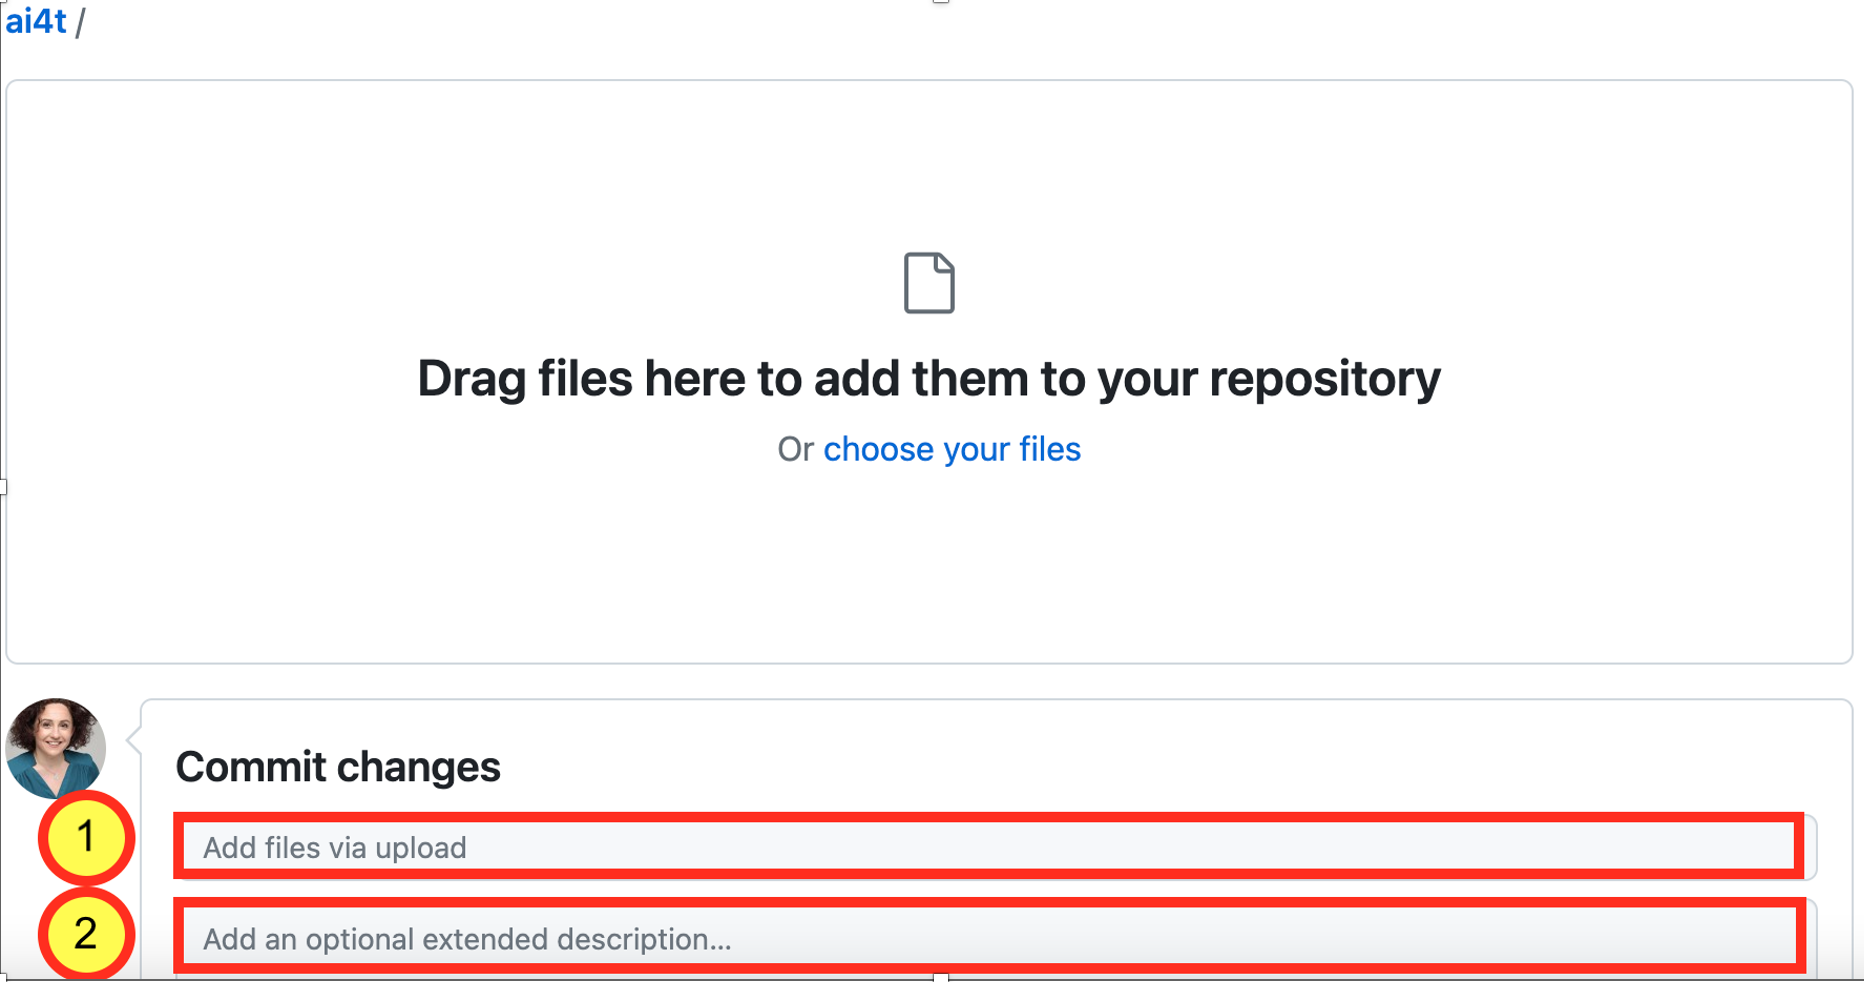 Visual - How to upload files in a fork - screen caption of github.